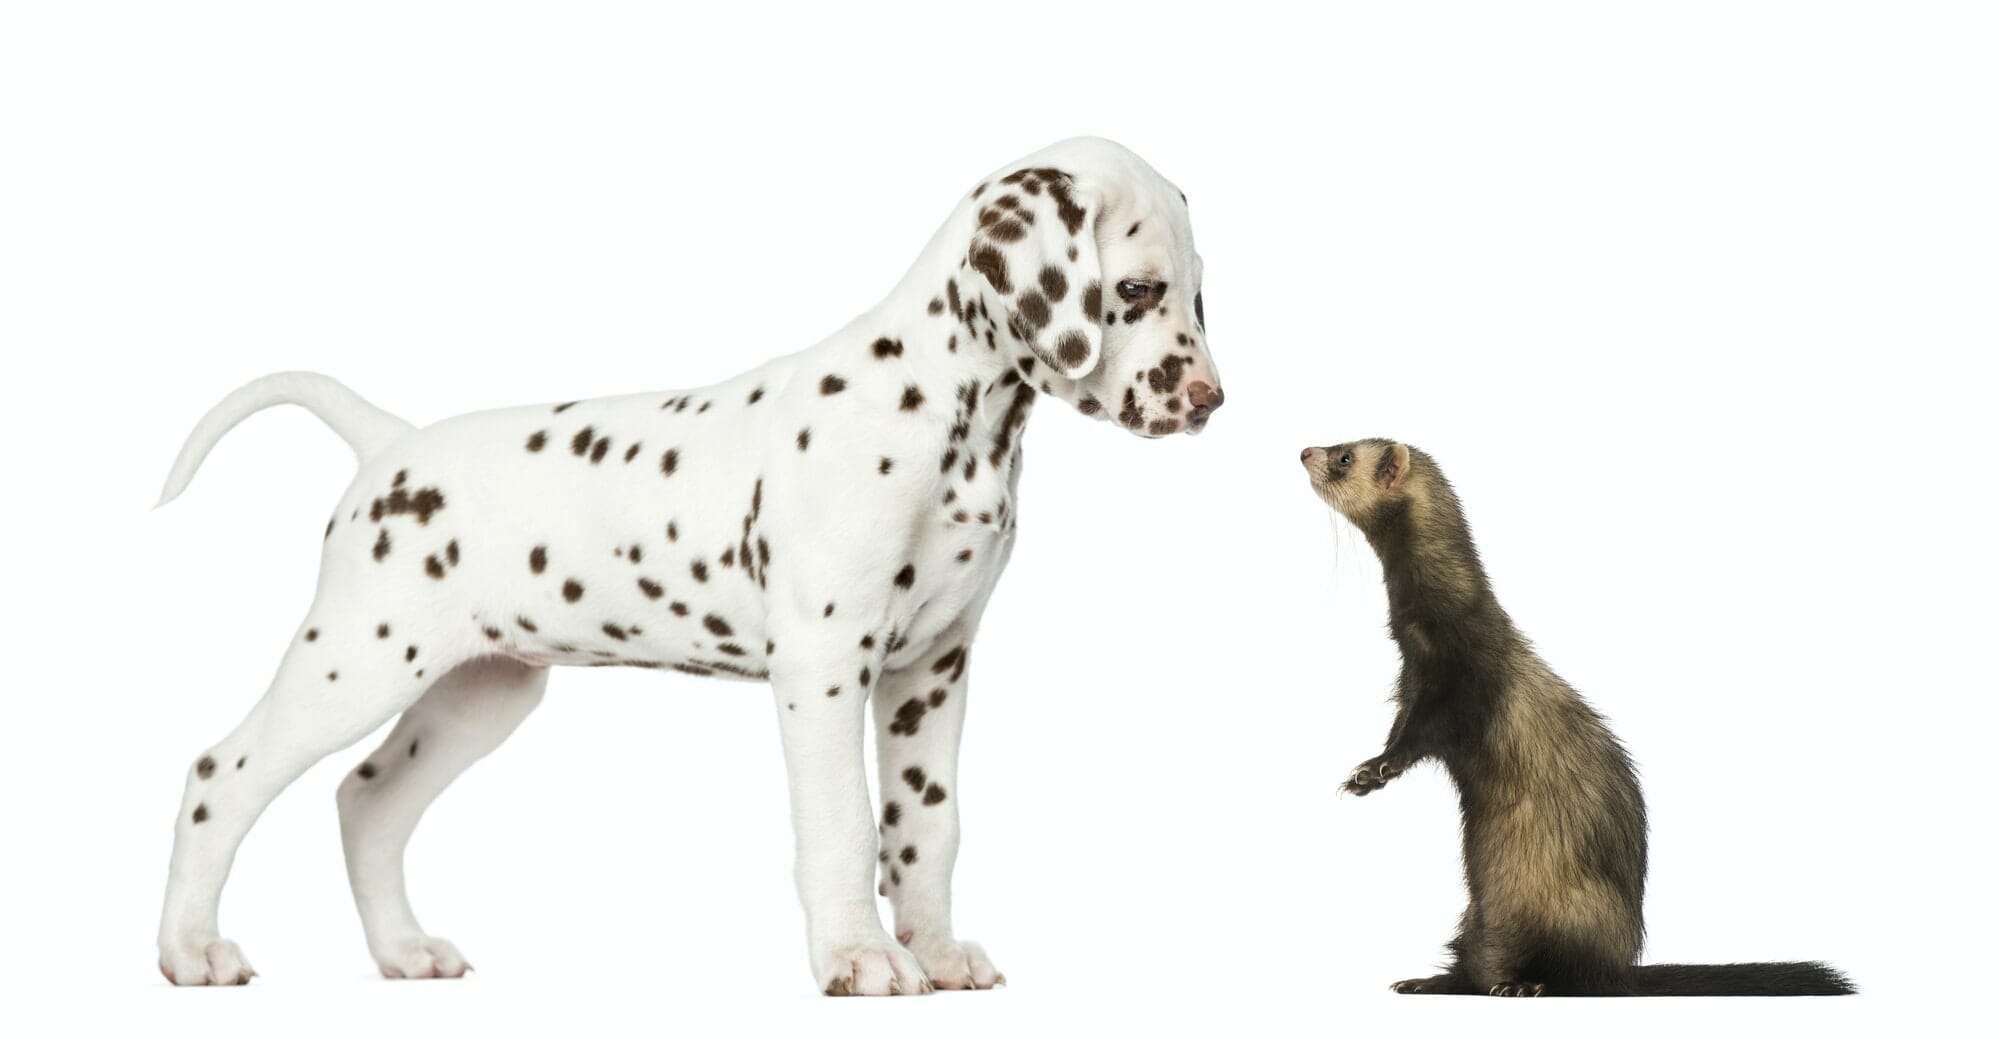 Dalmatian puppy standing and looking at a Ferret standing on hind legs